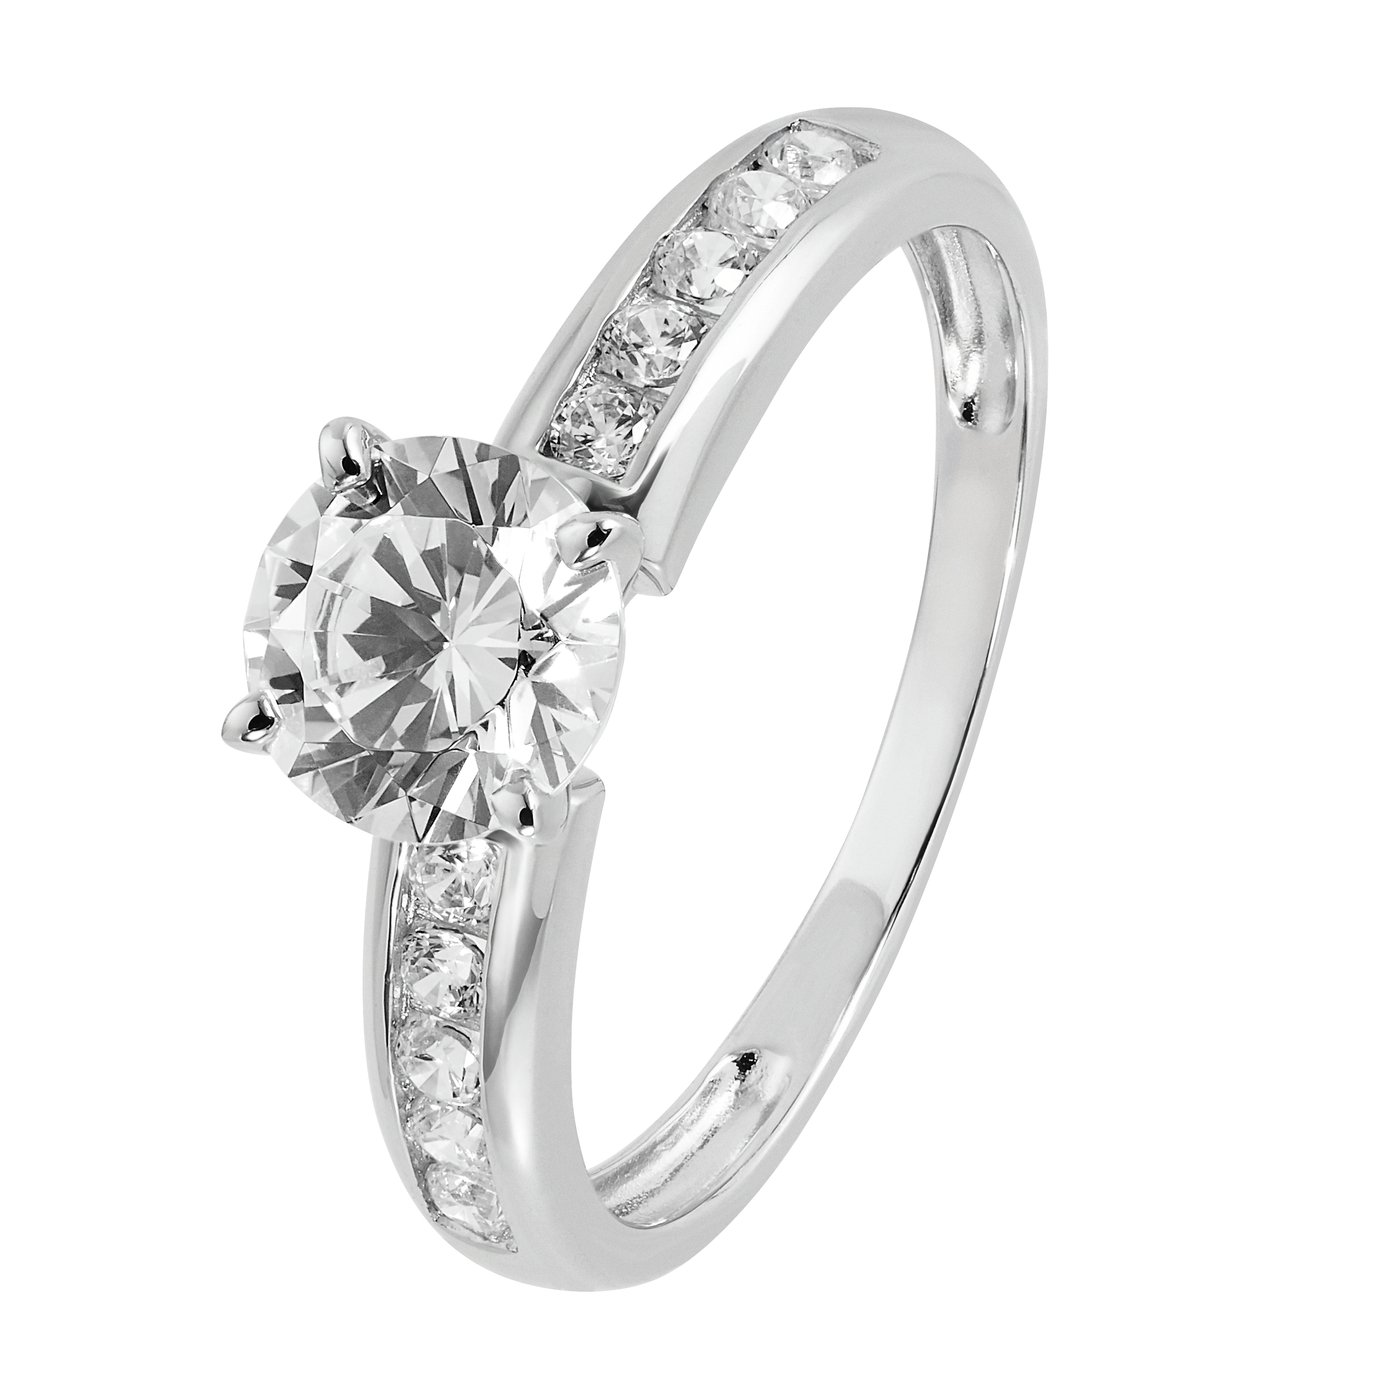 Revere 9ct White Gold Cubic Zirconia Engagement Ring - M